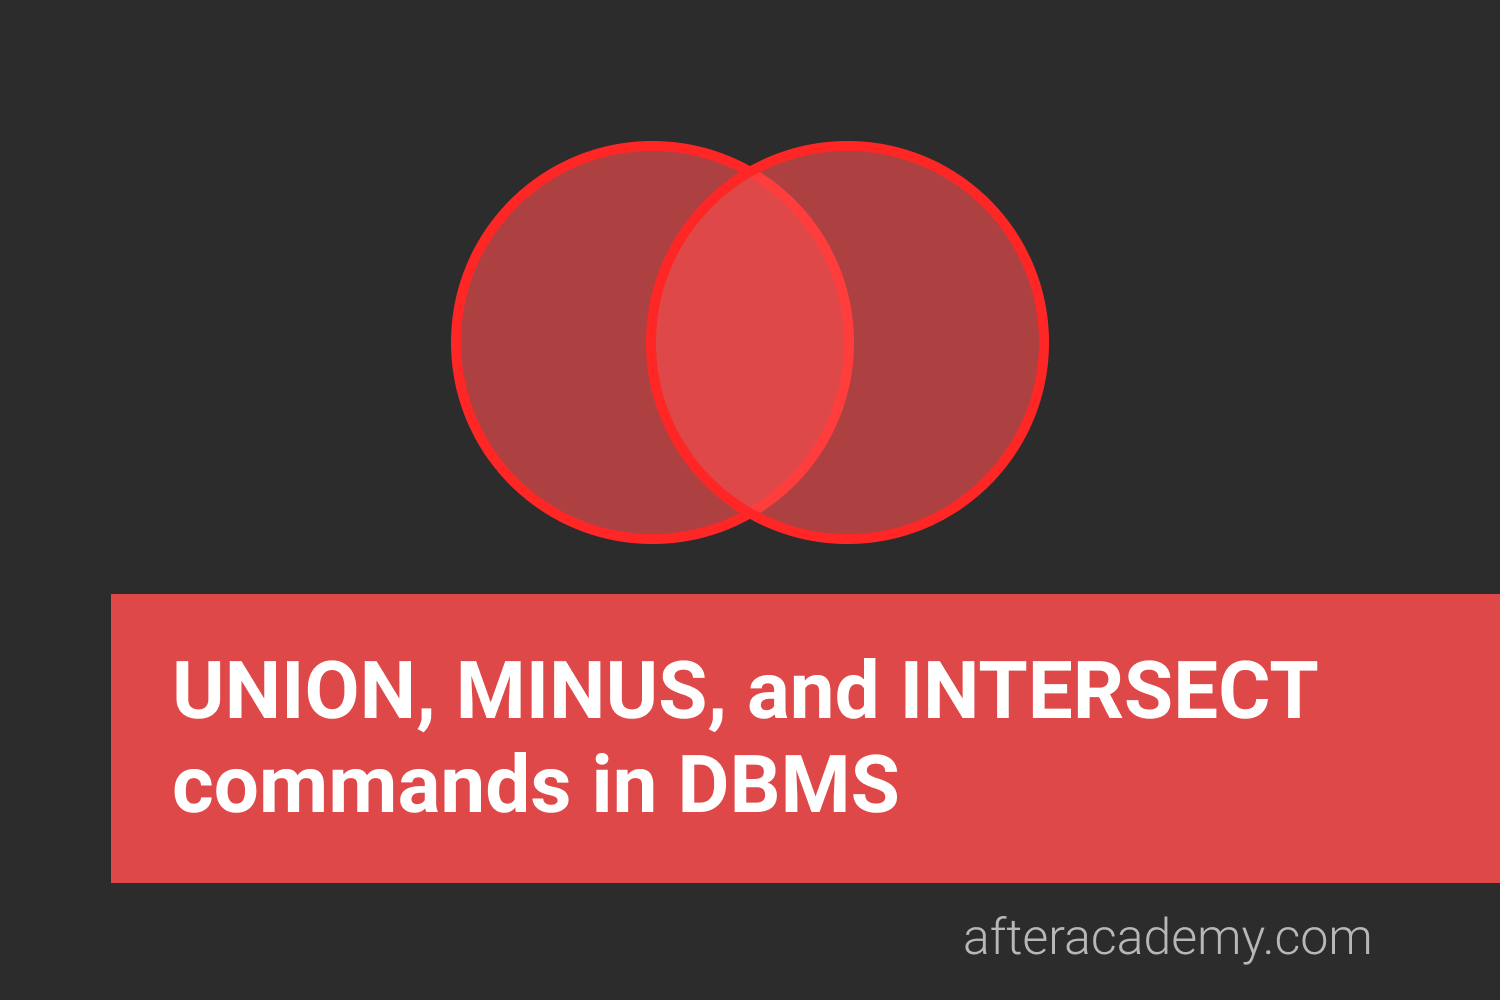 What are UNION, MINUS, and INTERSECT commands in DBMS?